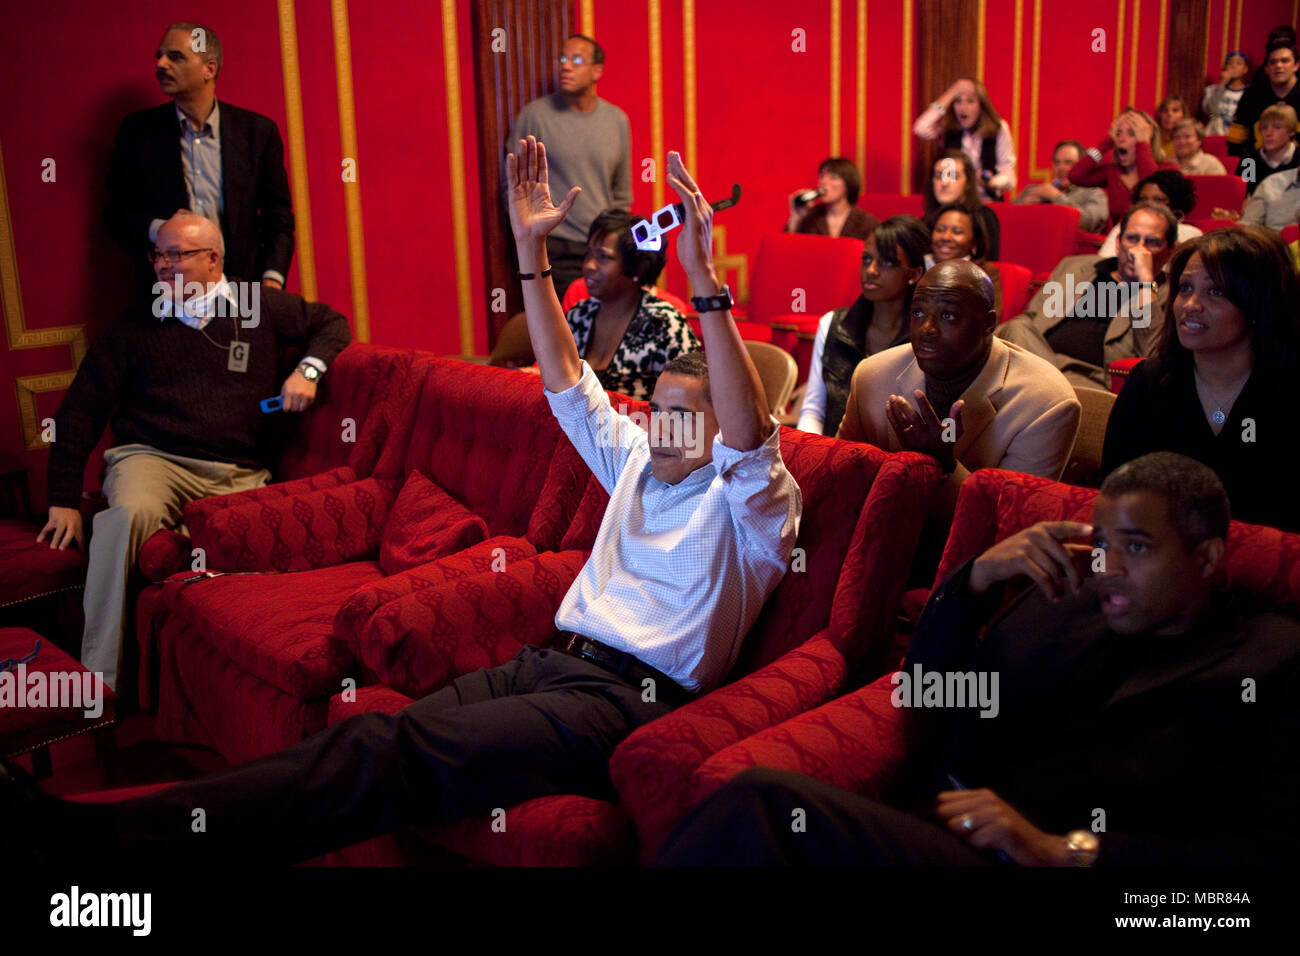 President Barack Obama holds 3-D glasses while watching the Super Bowl game at a Super Bowl Party in the family theater of the White House. Guests included family, friends, staff members and bipartisan members of Congress, 2/1/09. .Official White House Photo by Pete Souza Stock Photo